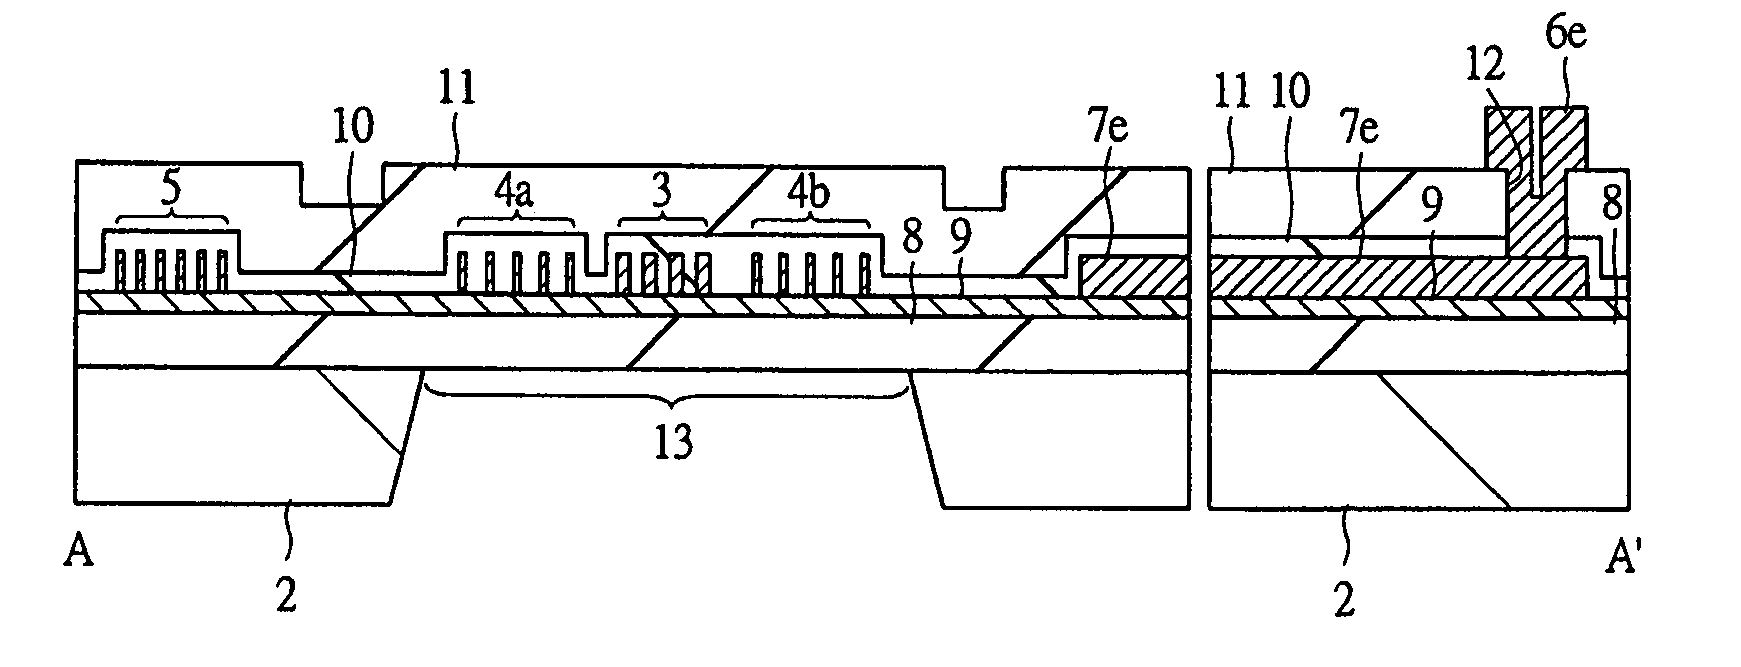 Flow sensor using a heat element and a resistance temperature detector formed of a metal film